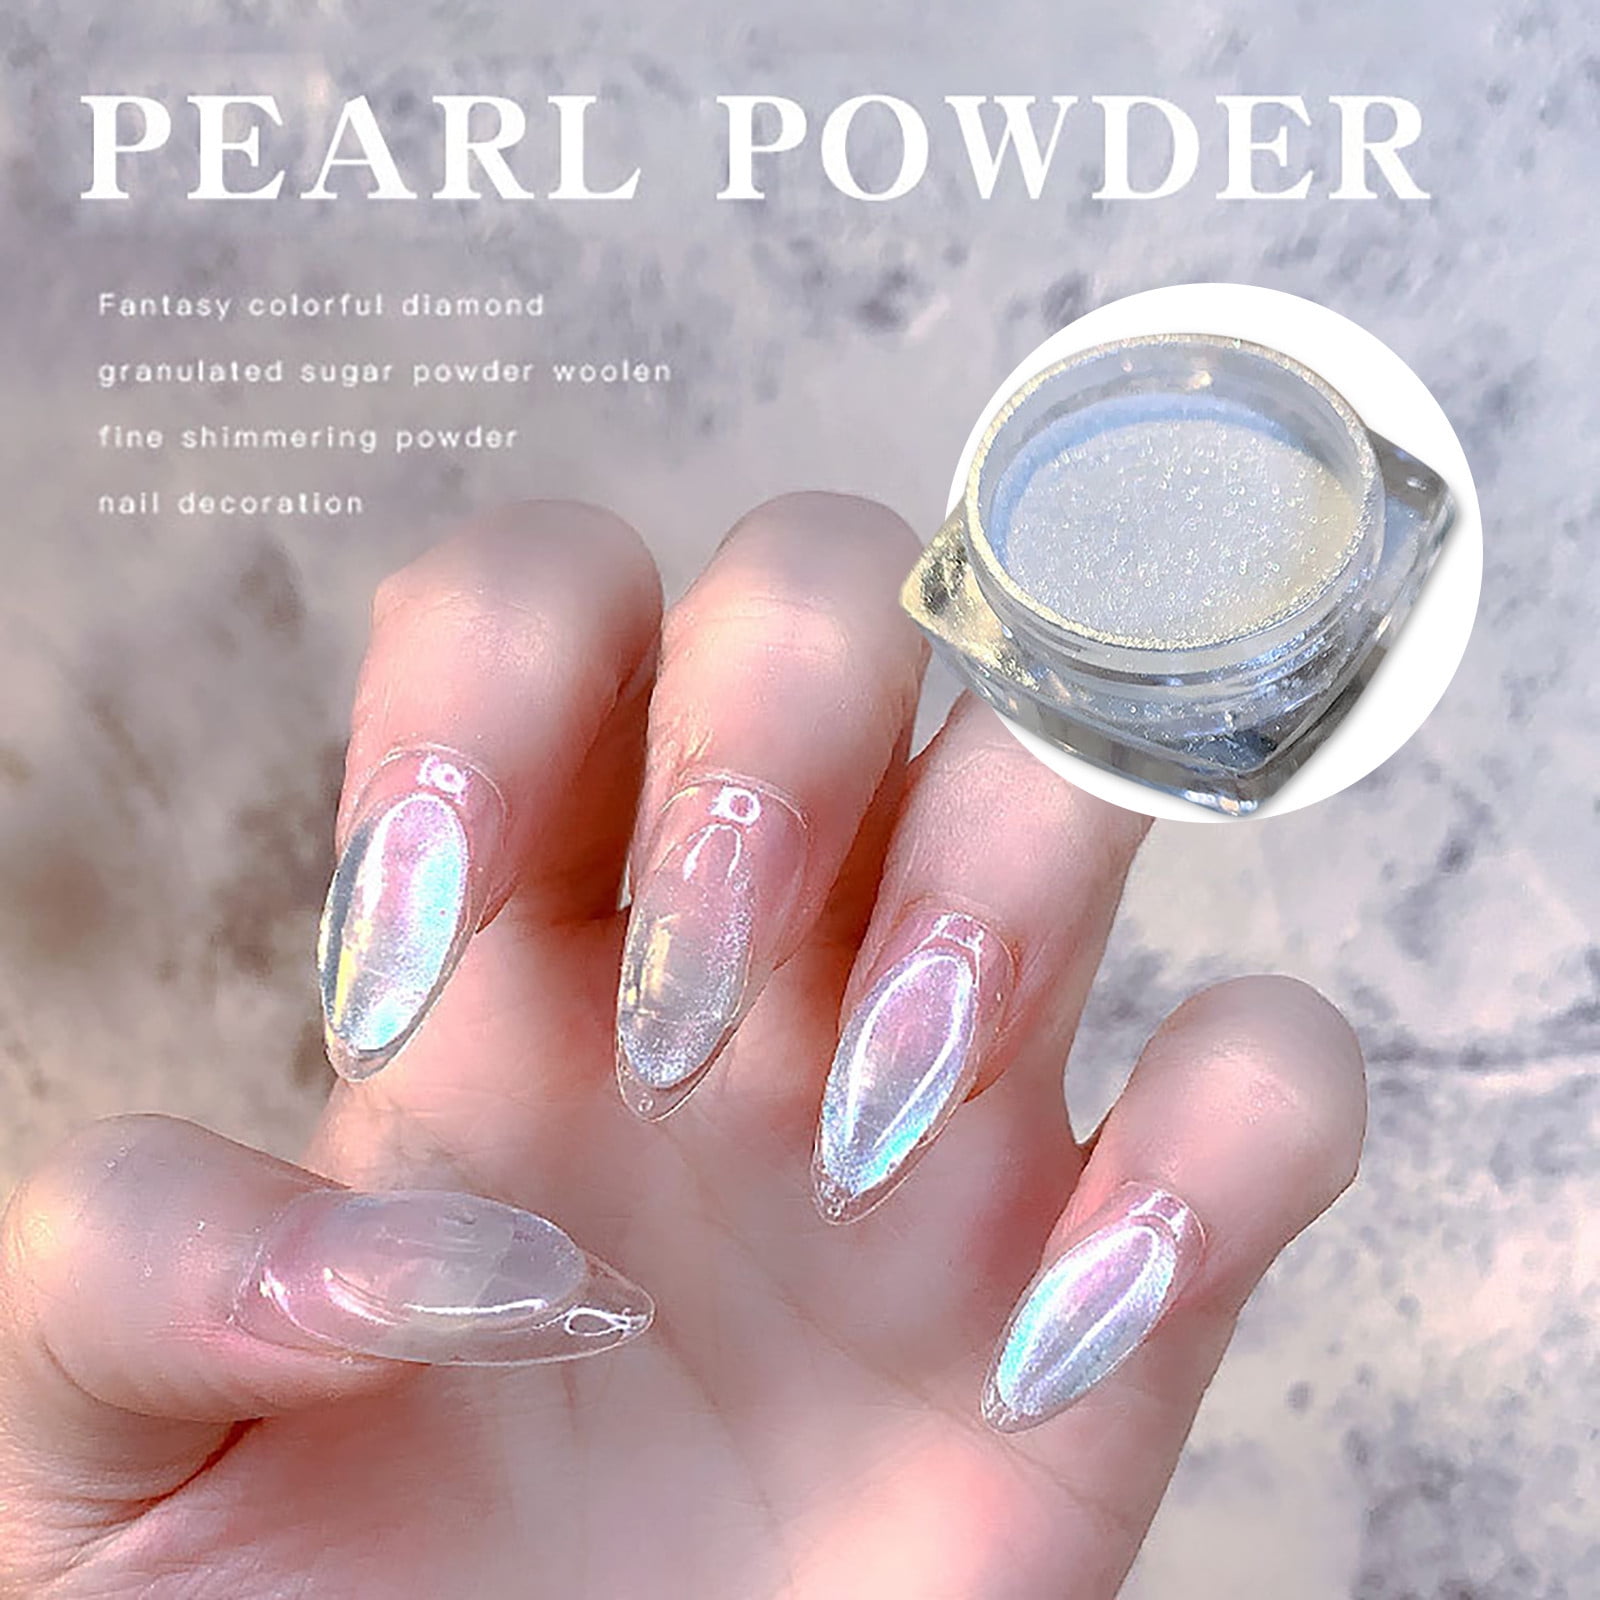 Why Vanilla Chrome Nails Are the Perfect Summer Mani